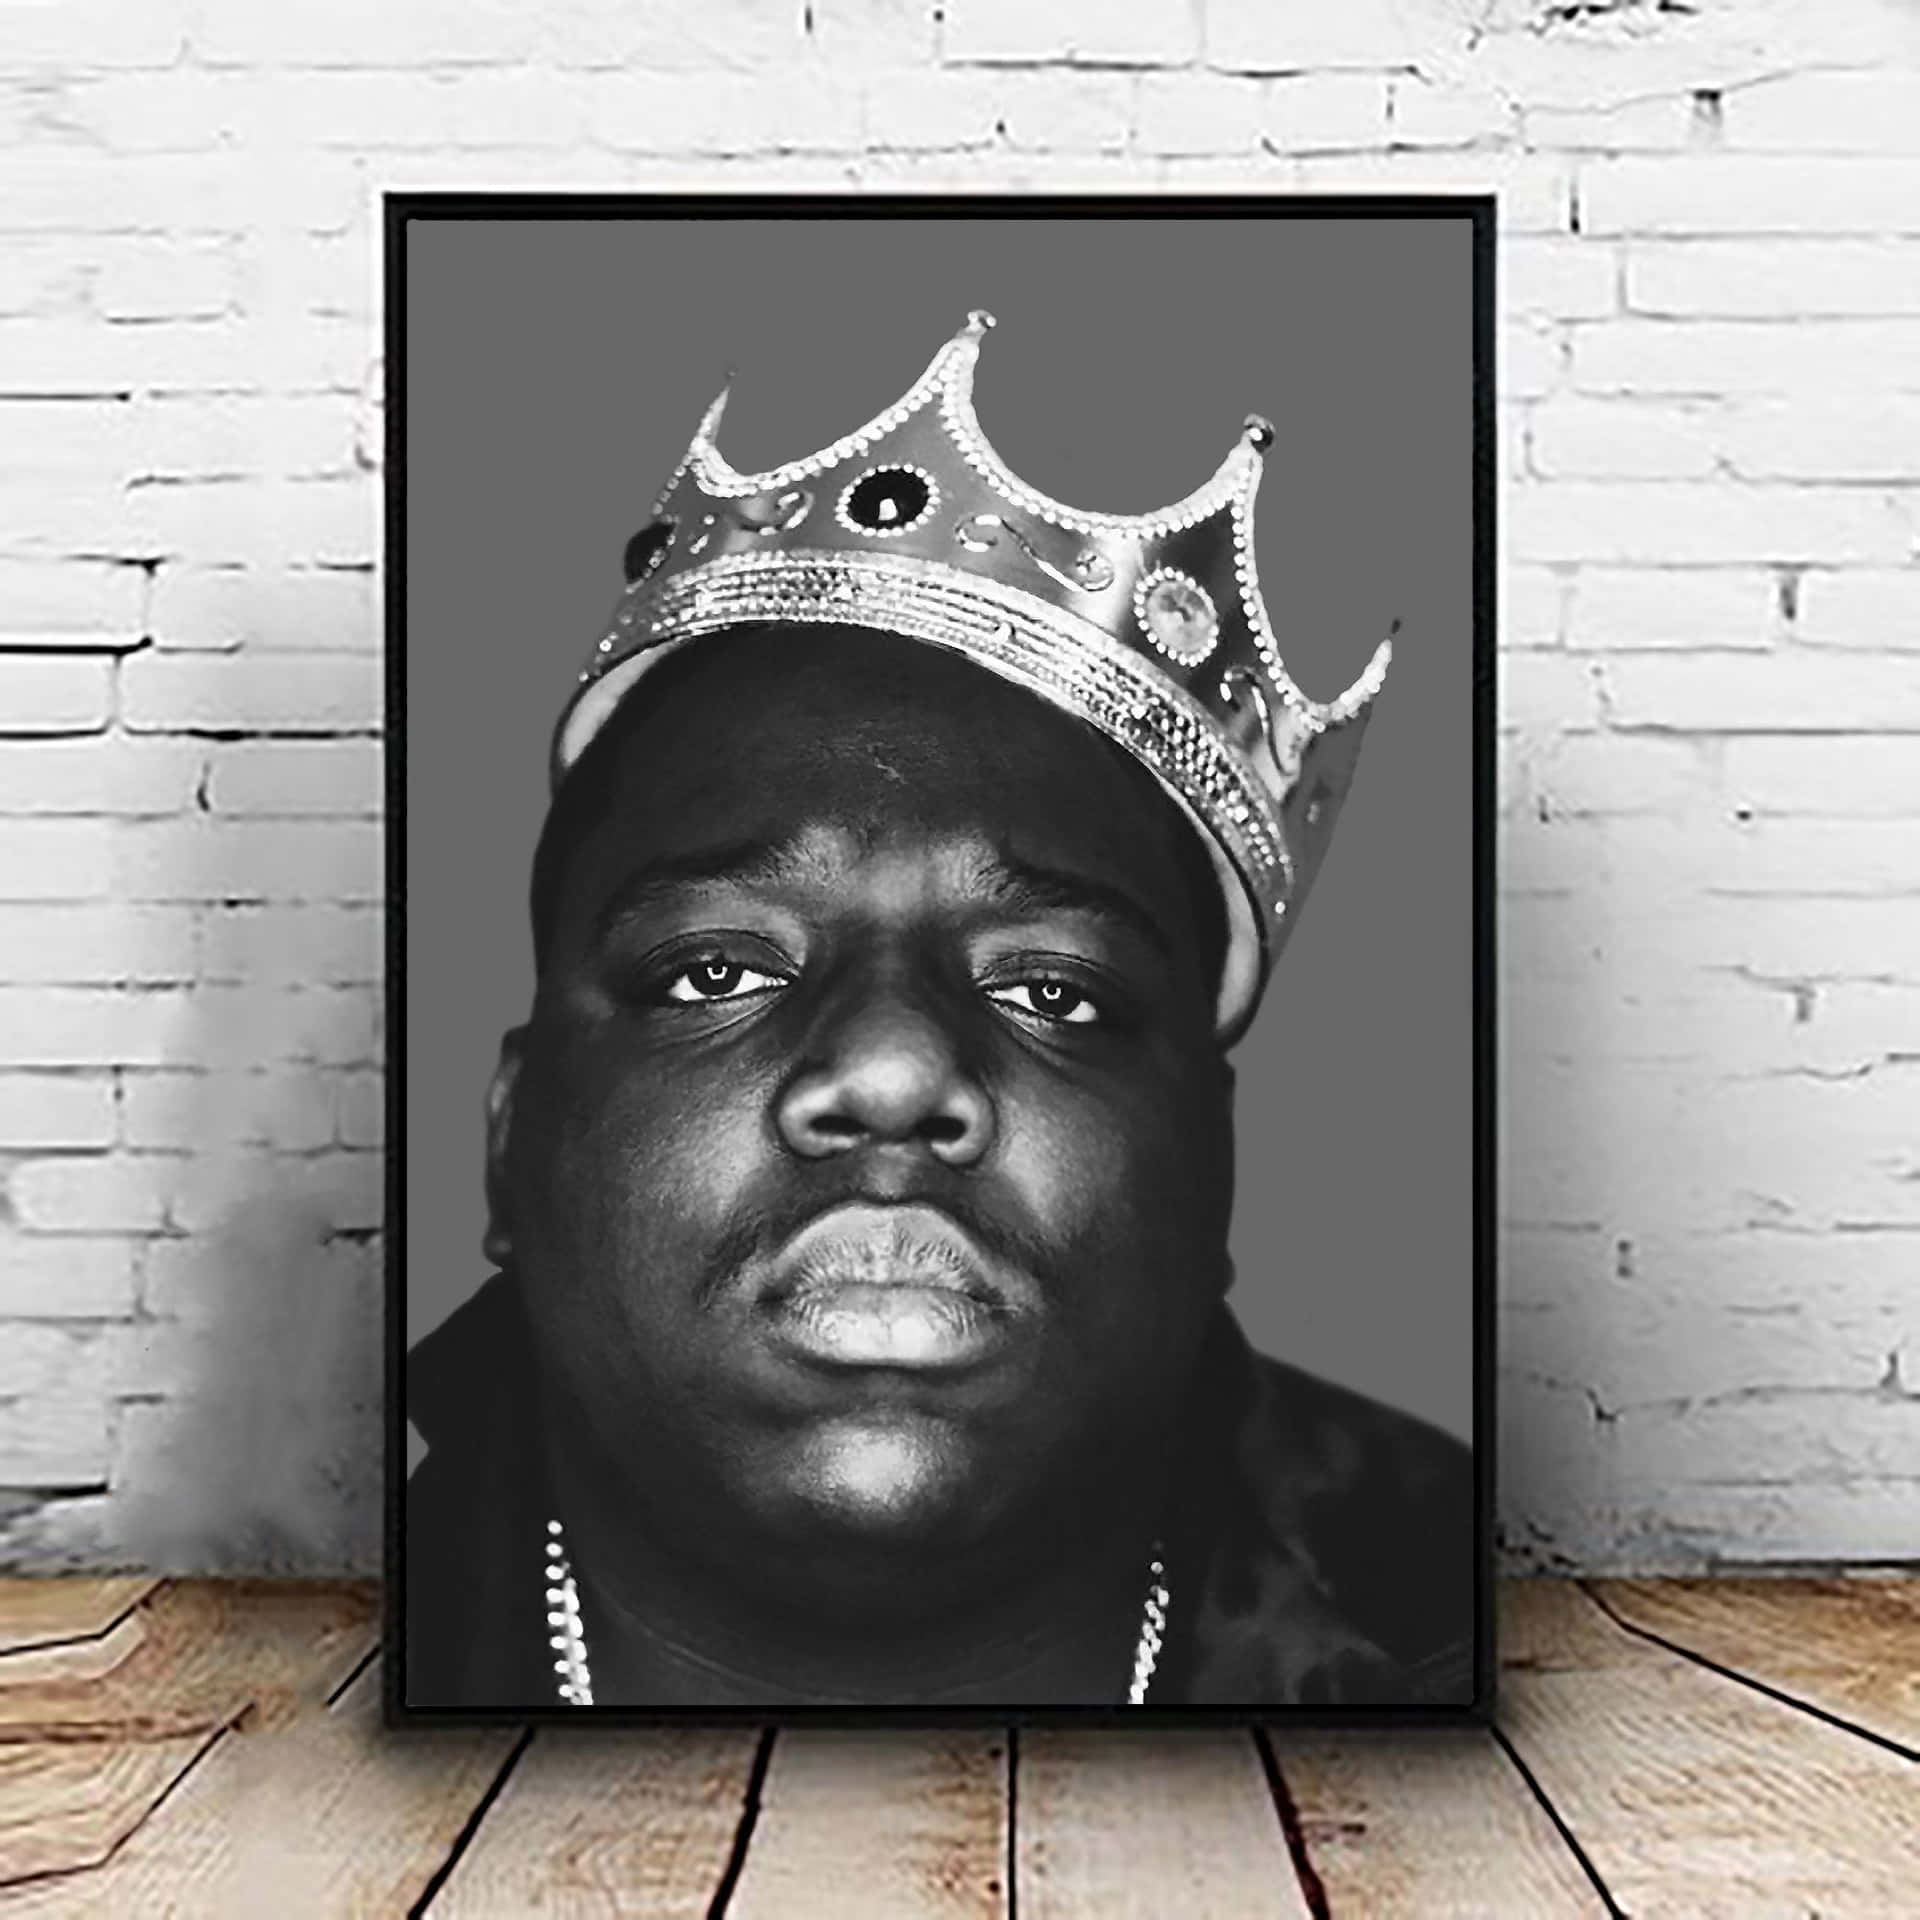 Download The Notorious Big Portrait On Frame Wallpaper 